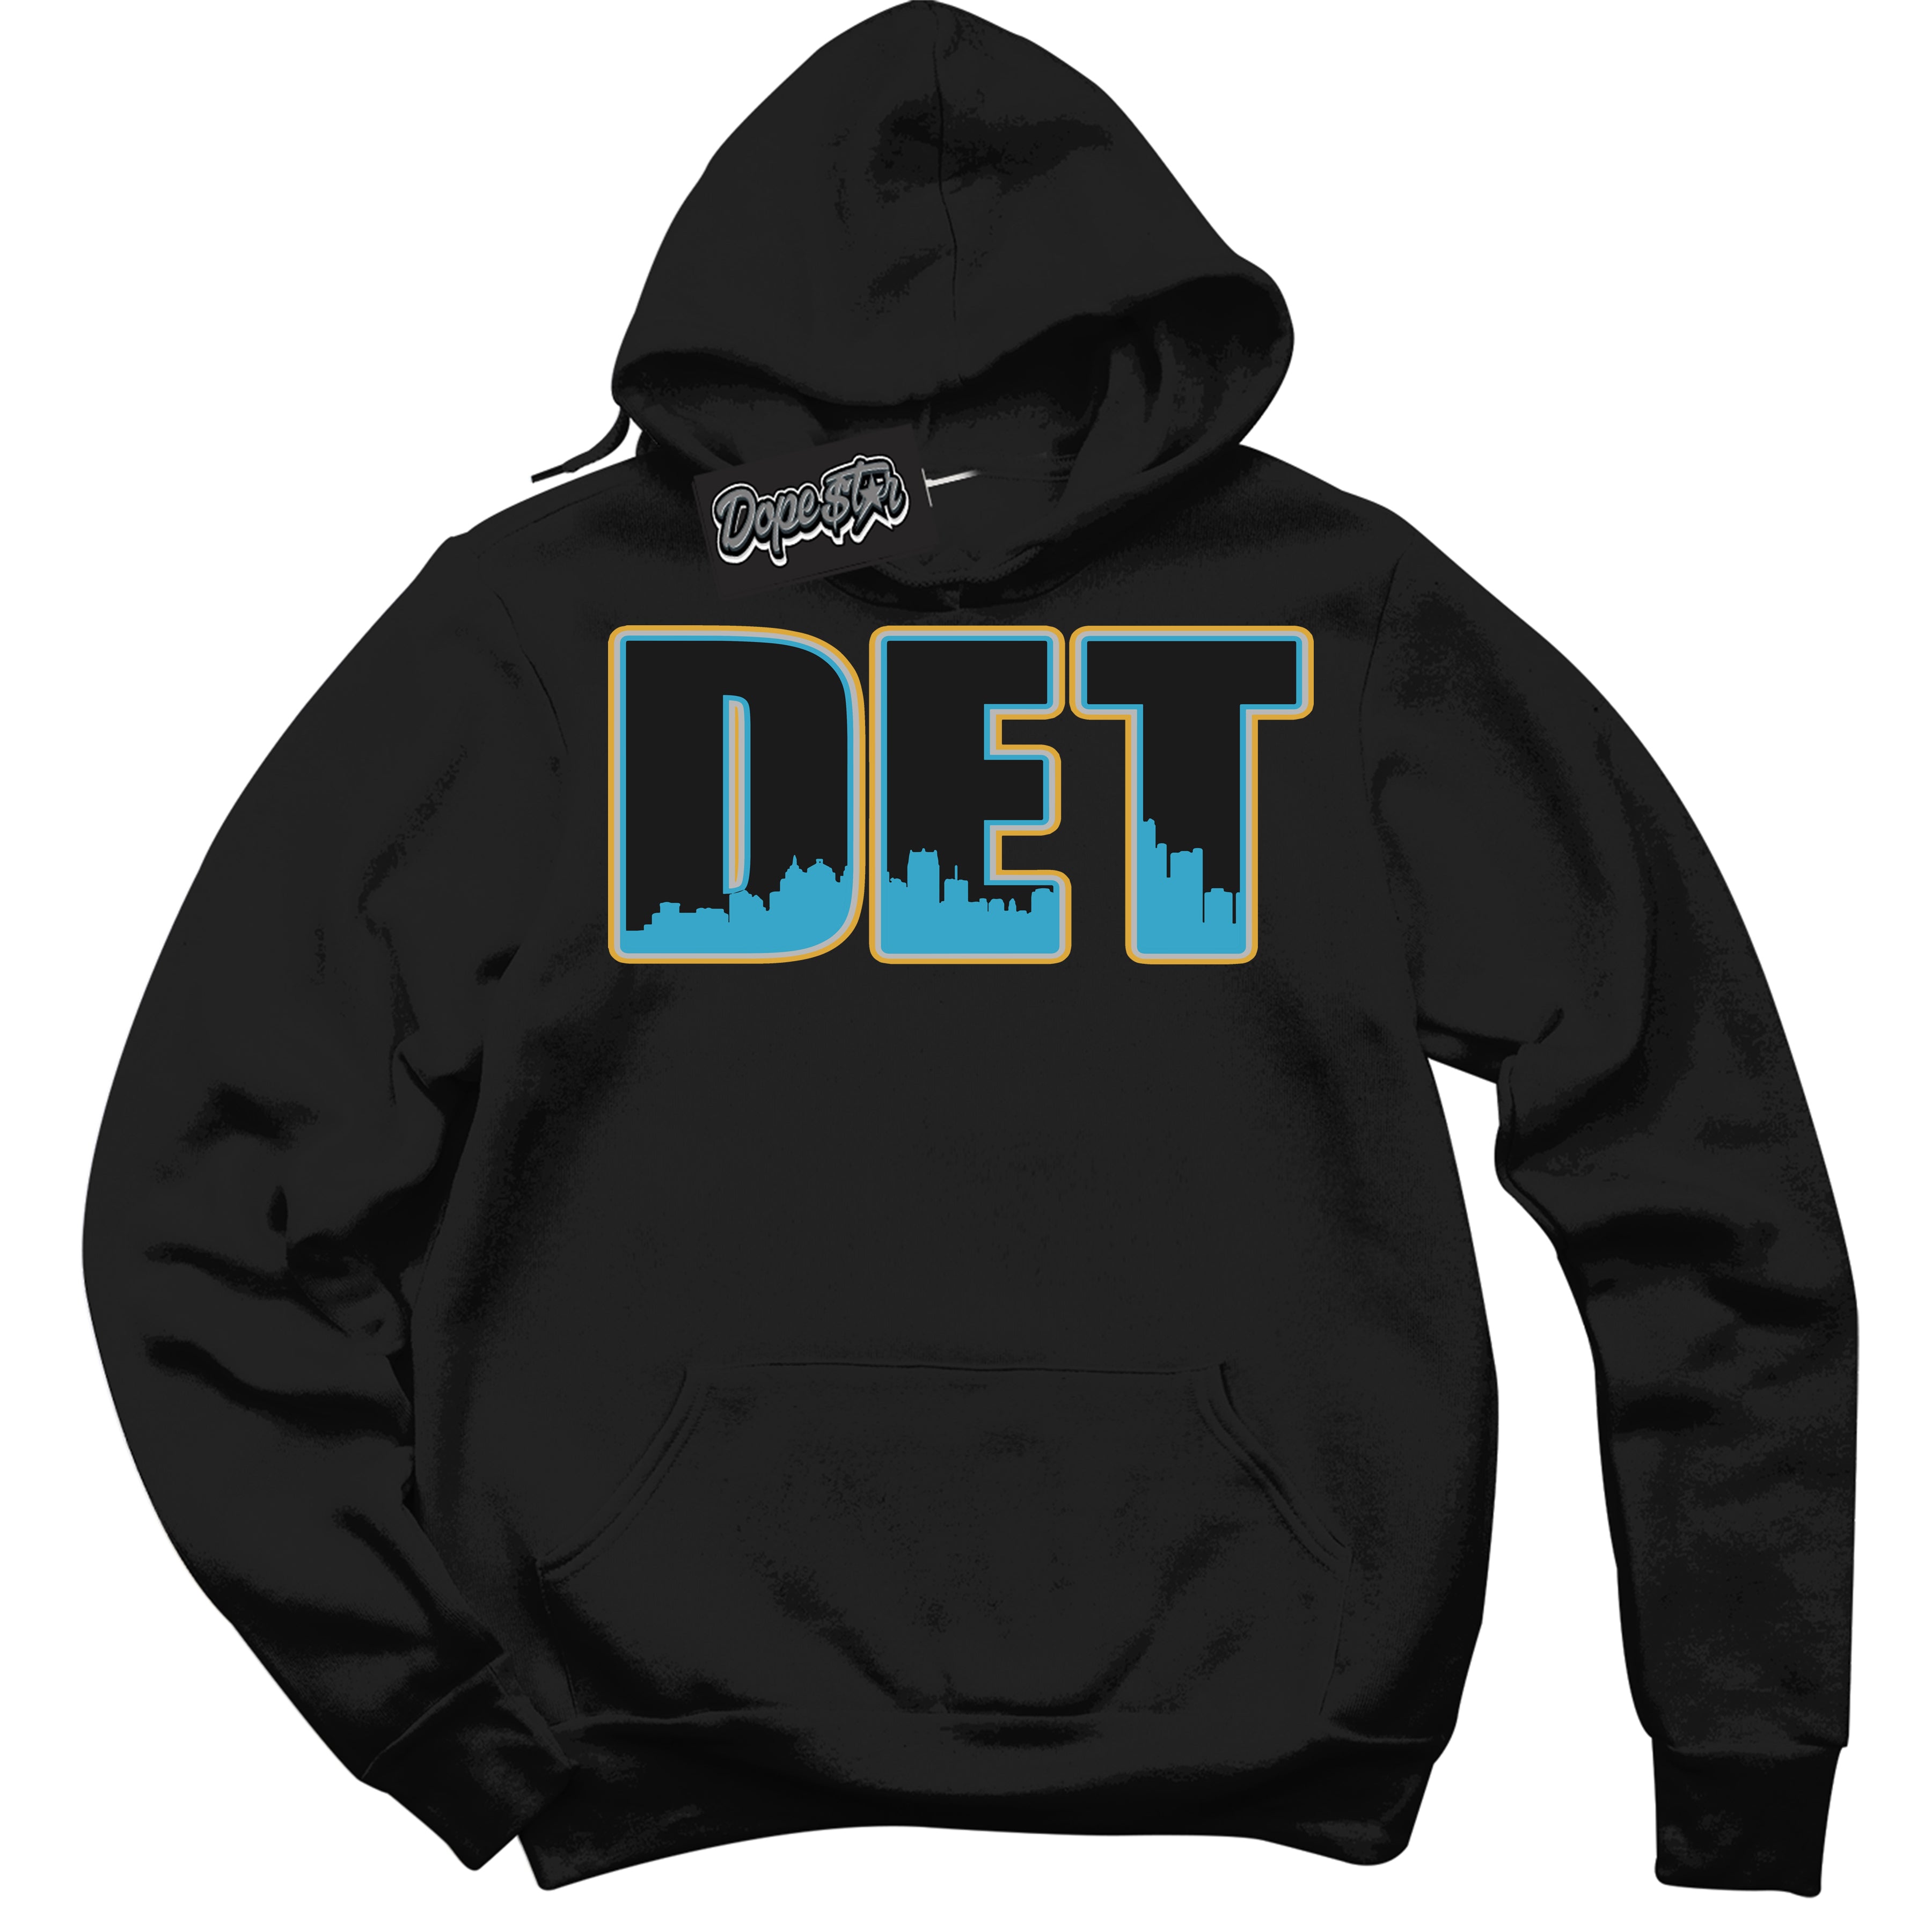 Cool Black Hoodie with “ Detroit ”  design that Perfectly Matches Aqua 5s Sneakers.